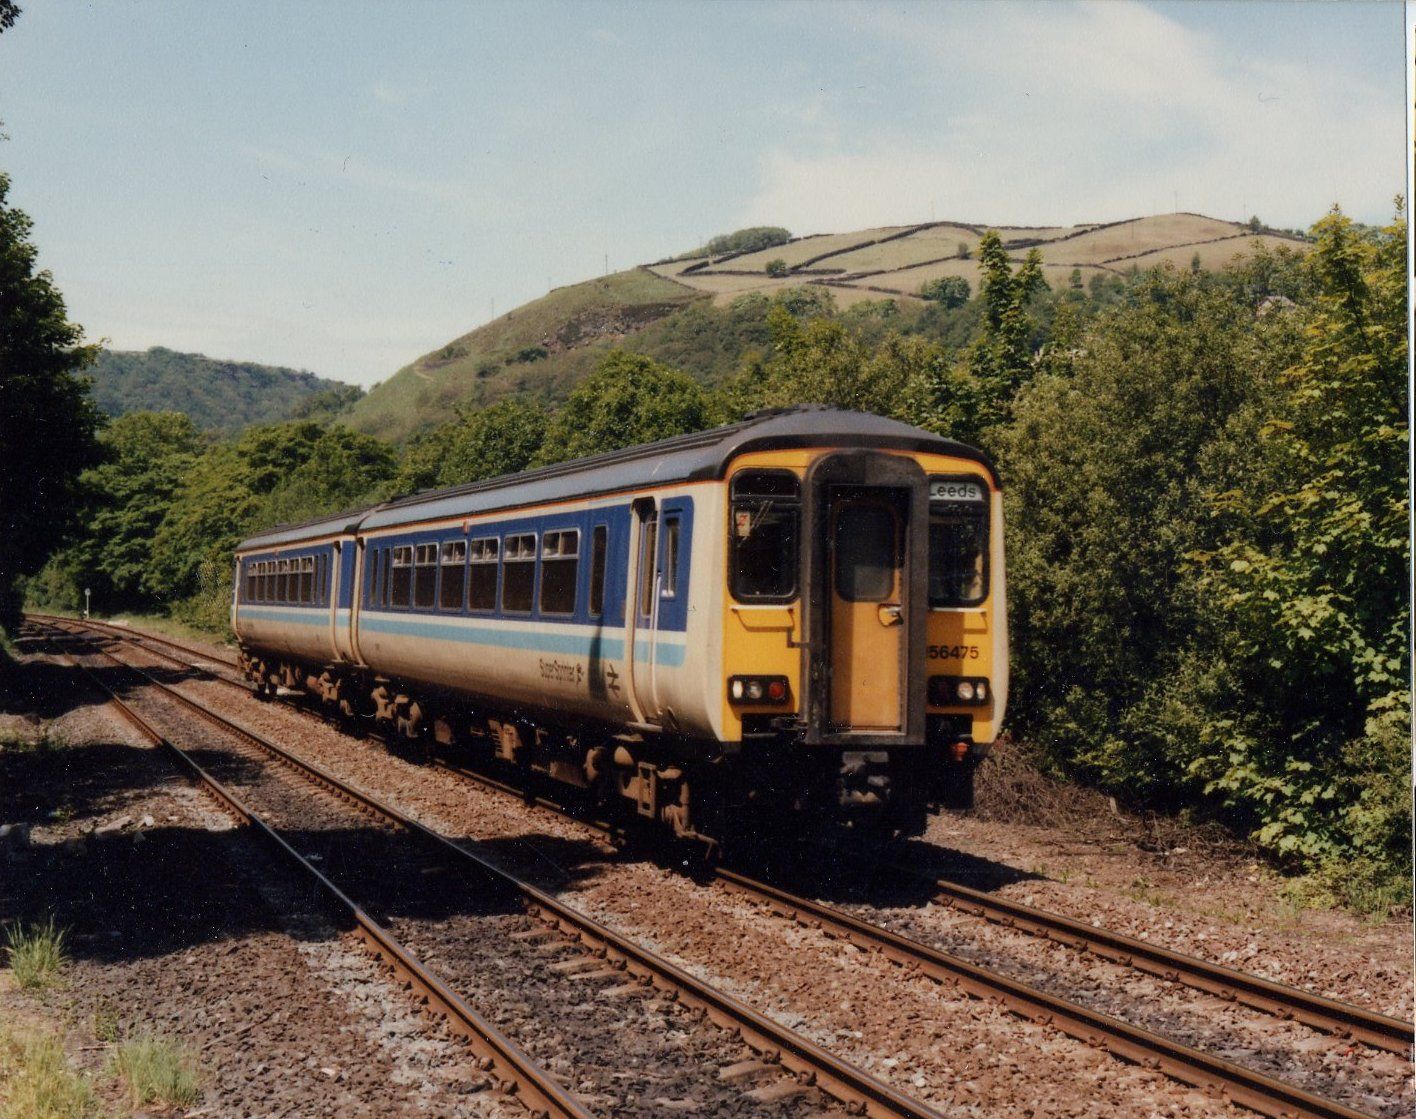 Image showing 156475 somewhere in the Pennines